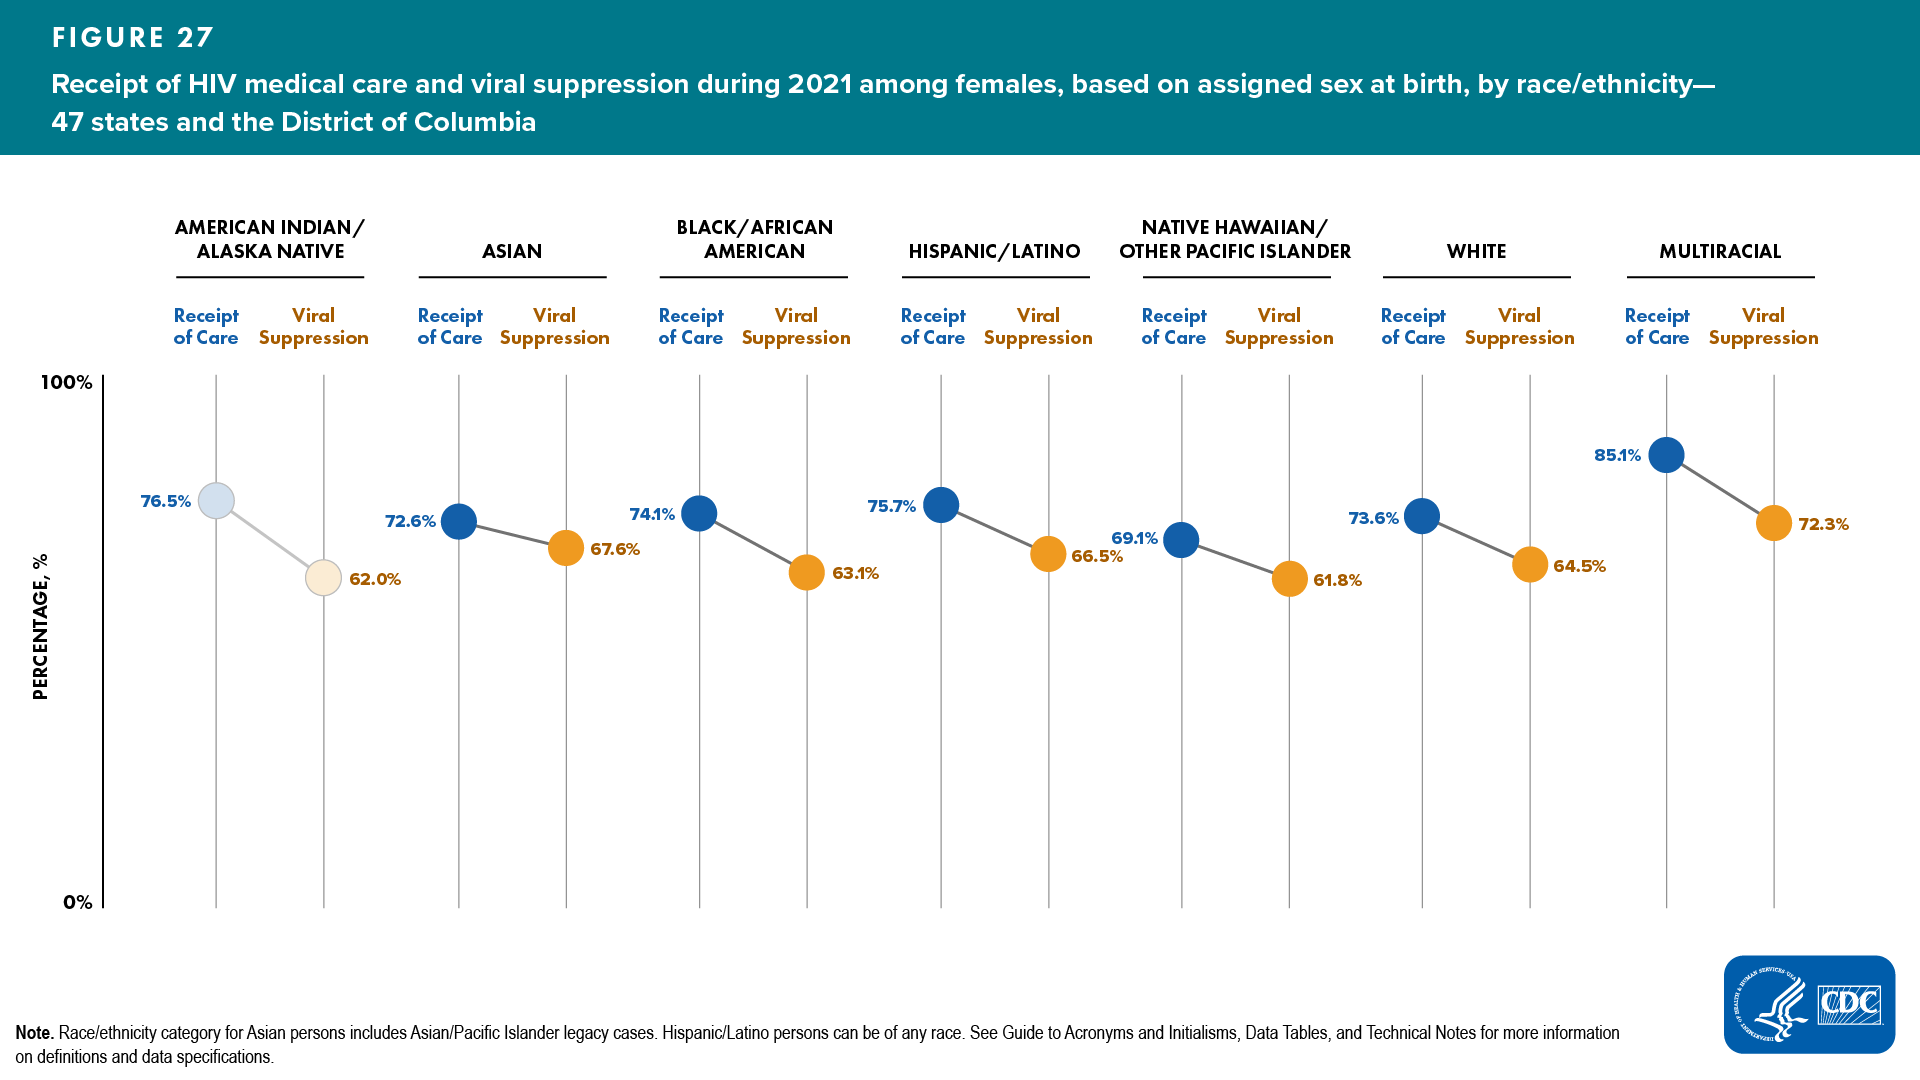 Figure 27. Receipt of HIV medical care and viral suppression during 2021 among females, based on assigned sex at birth, by race/ethnicity — 47 states and the District of Columbia